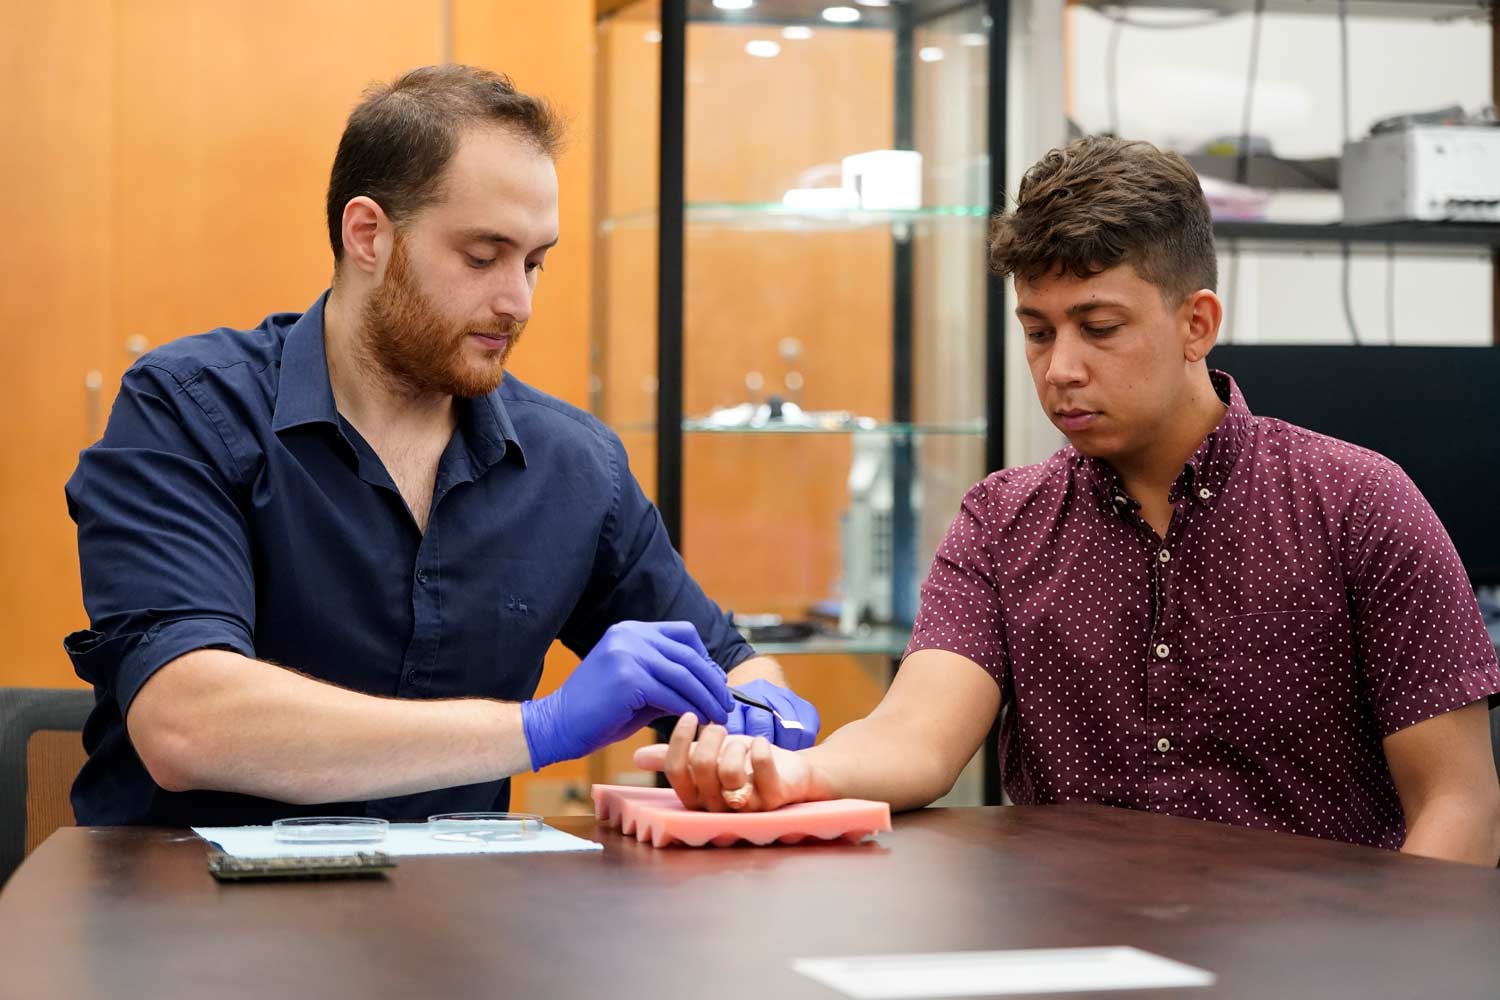 Student demonstrating the adminstration of an e-tattoo on a student's wrist.